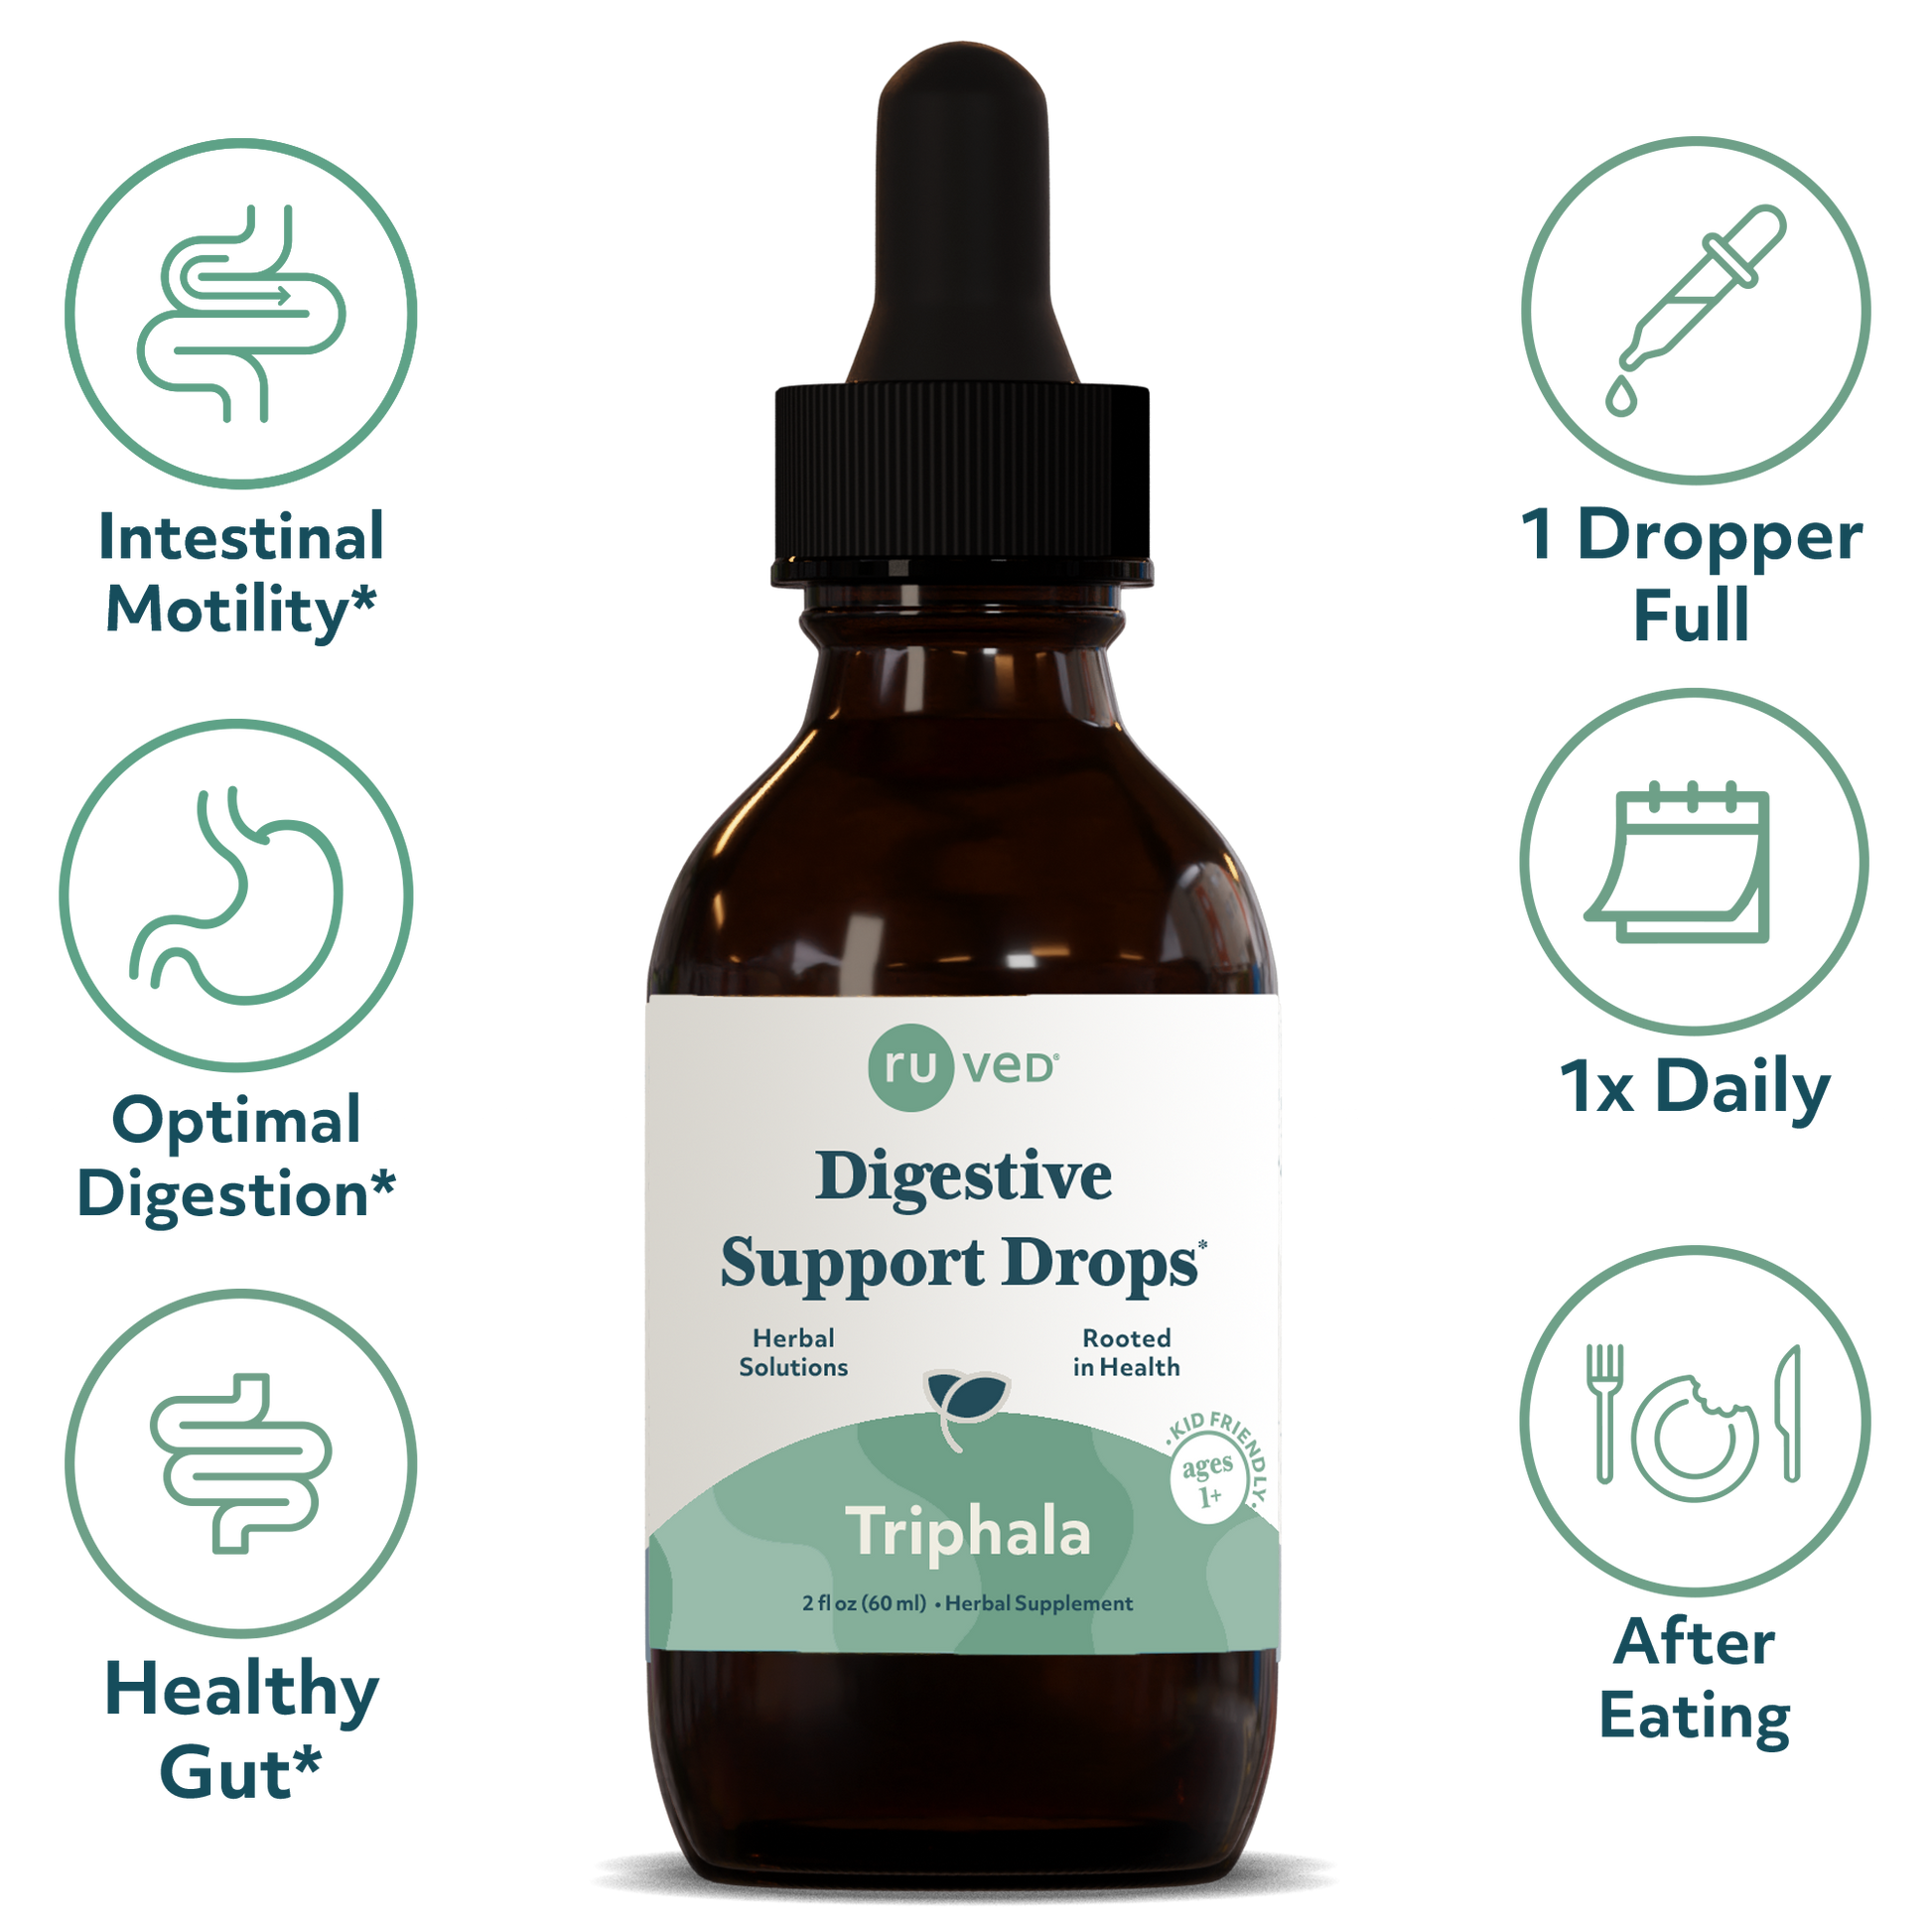 Triphala Drops Infographics - Ayurvedic Digestive Support, 60ml Bottle, Herbal Blend for Gut Health and Digestion Detoxification.